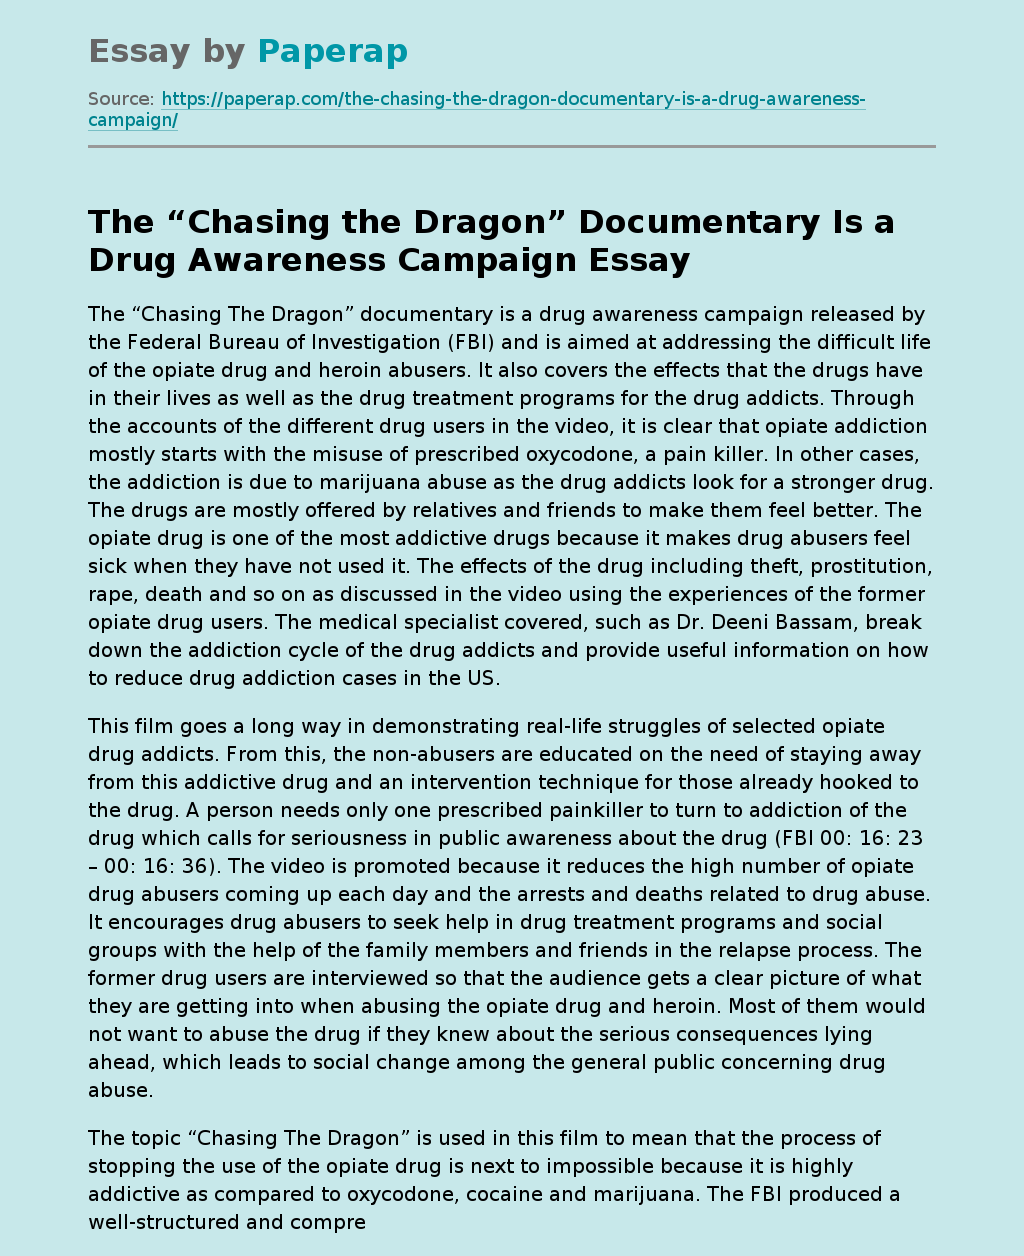 The “Chasing the Dragon” Documentary Is a Drug Awareness Campaign